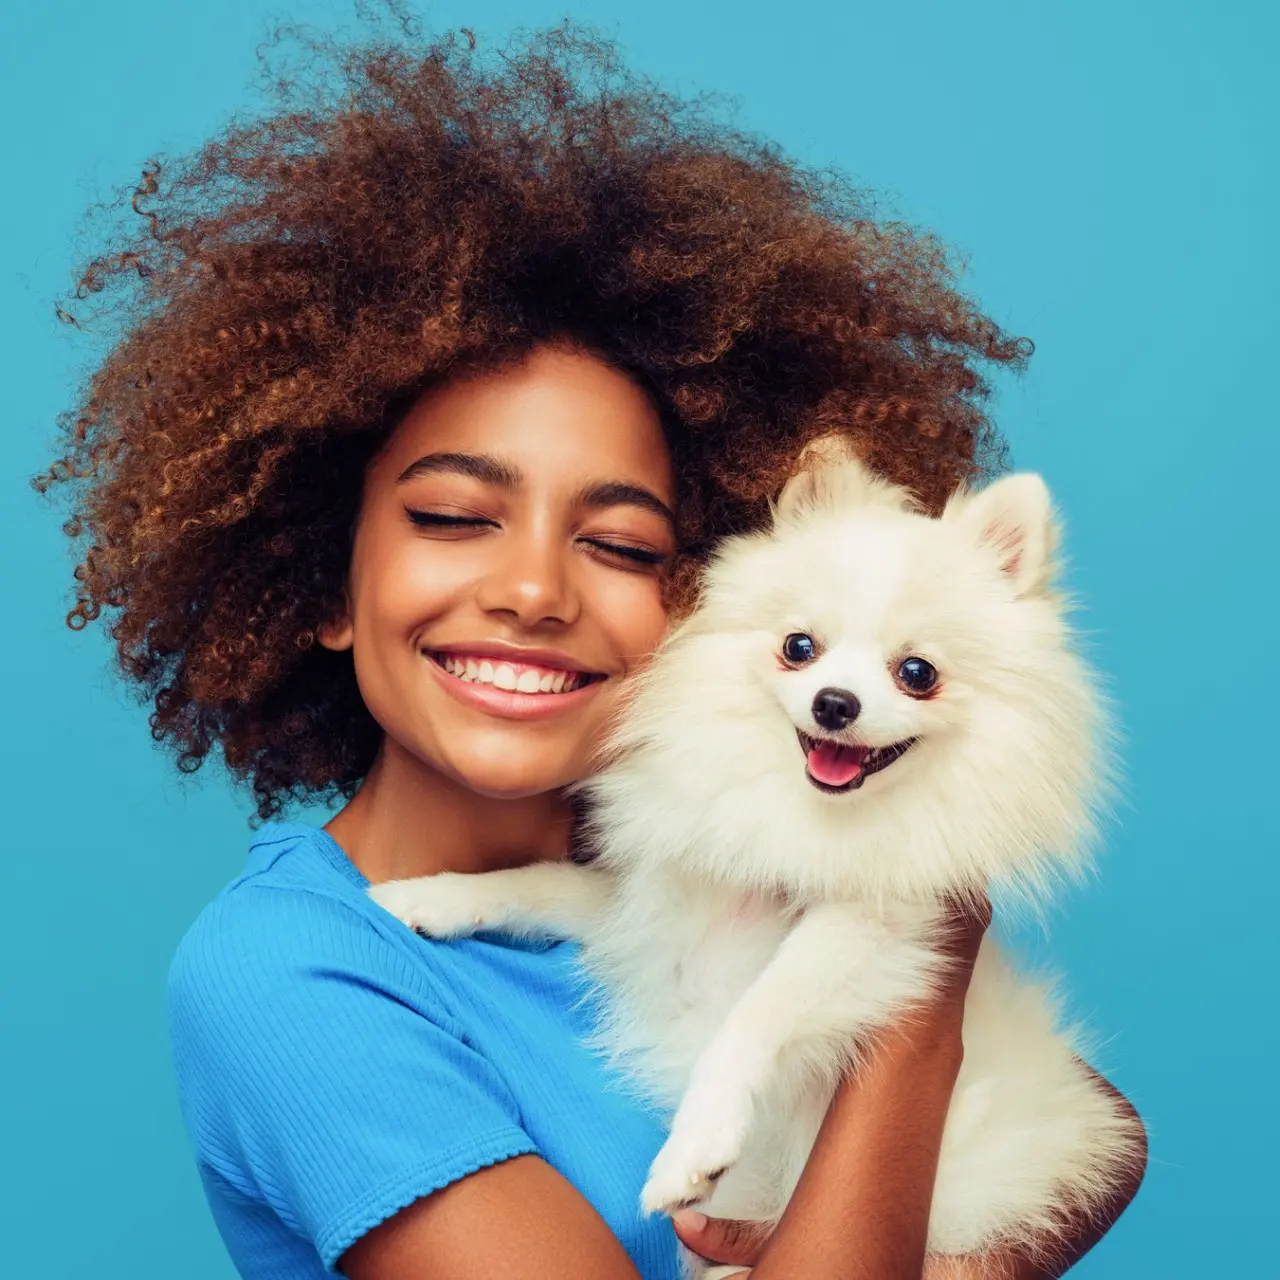 Teen girl holding dog closely: Should I get a dog?